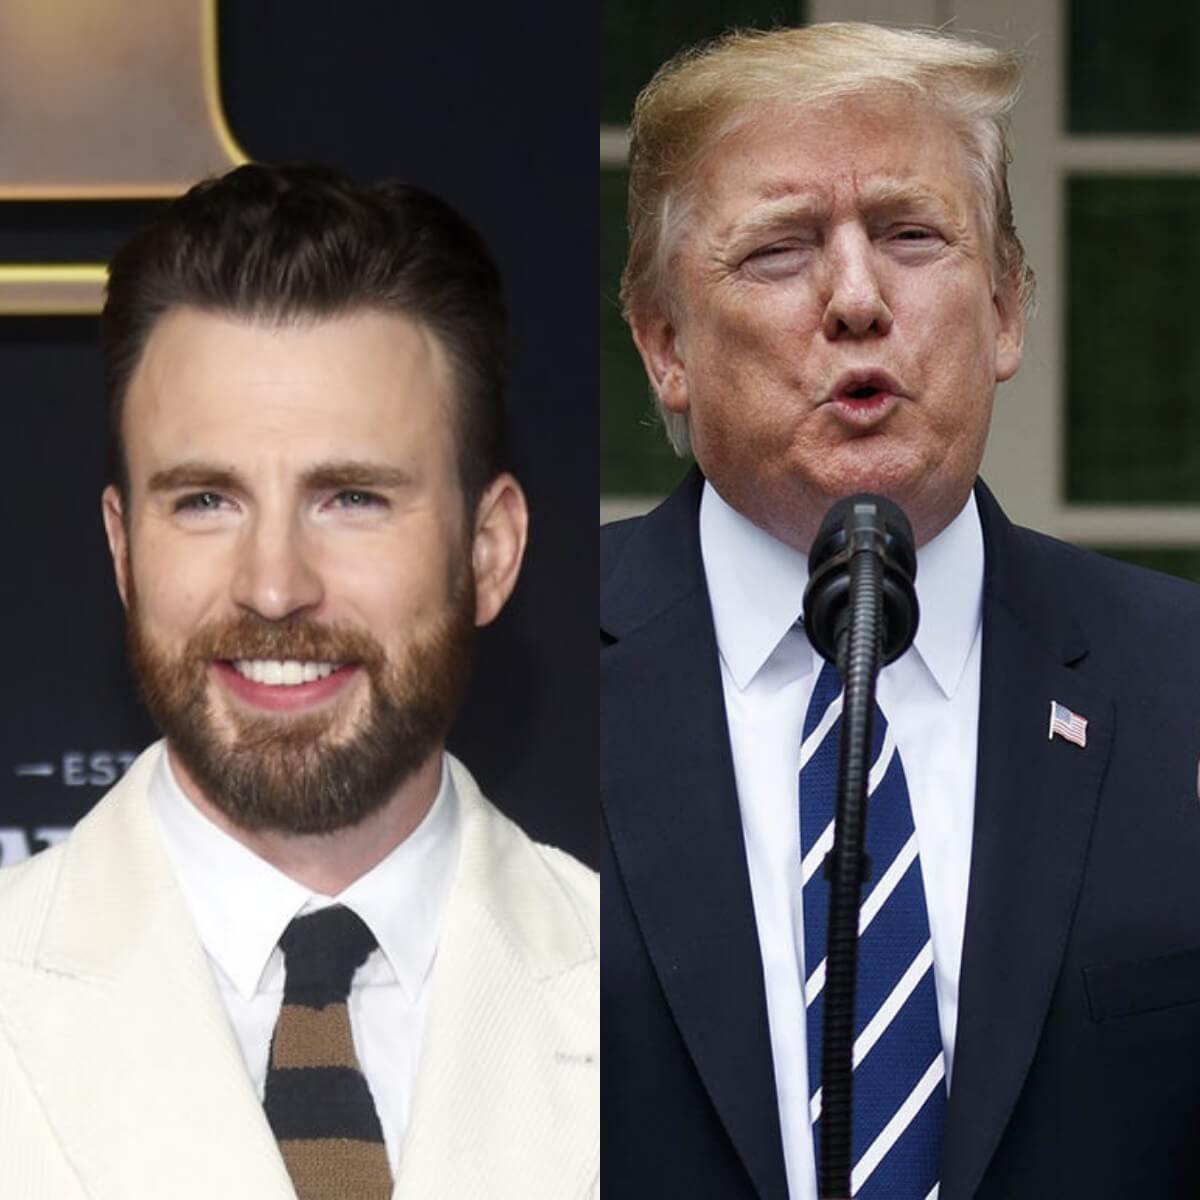 Coronavirus: Chris Evans Calls Out President Trump For ‘Running’ Off Stage During Health Briefing  